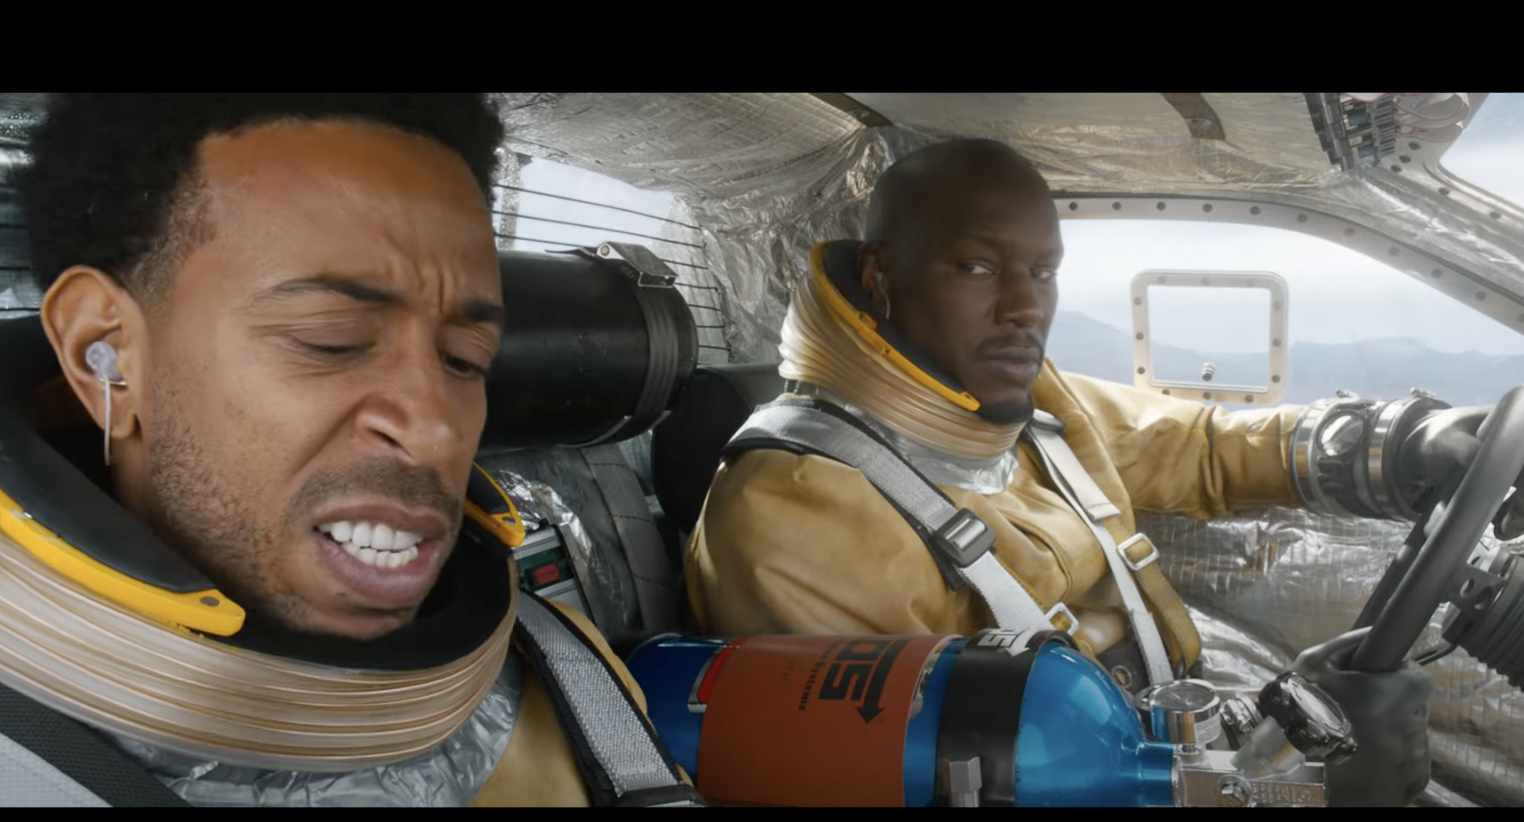 Fast 9': Bow Wow Returns to 'Fast and Furious' in New Trailer